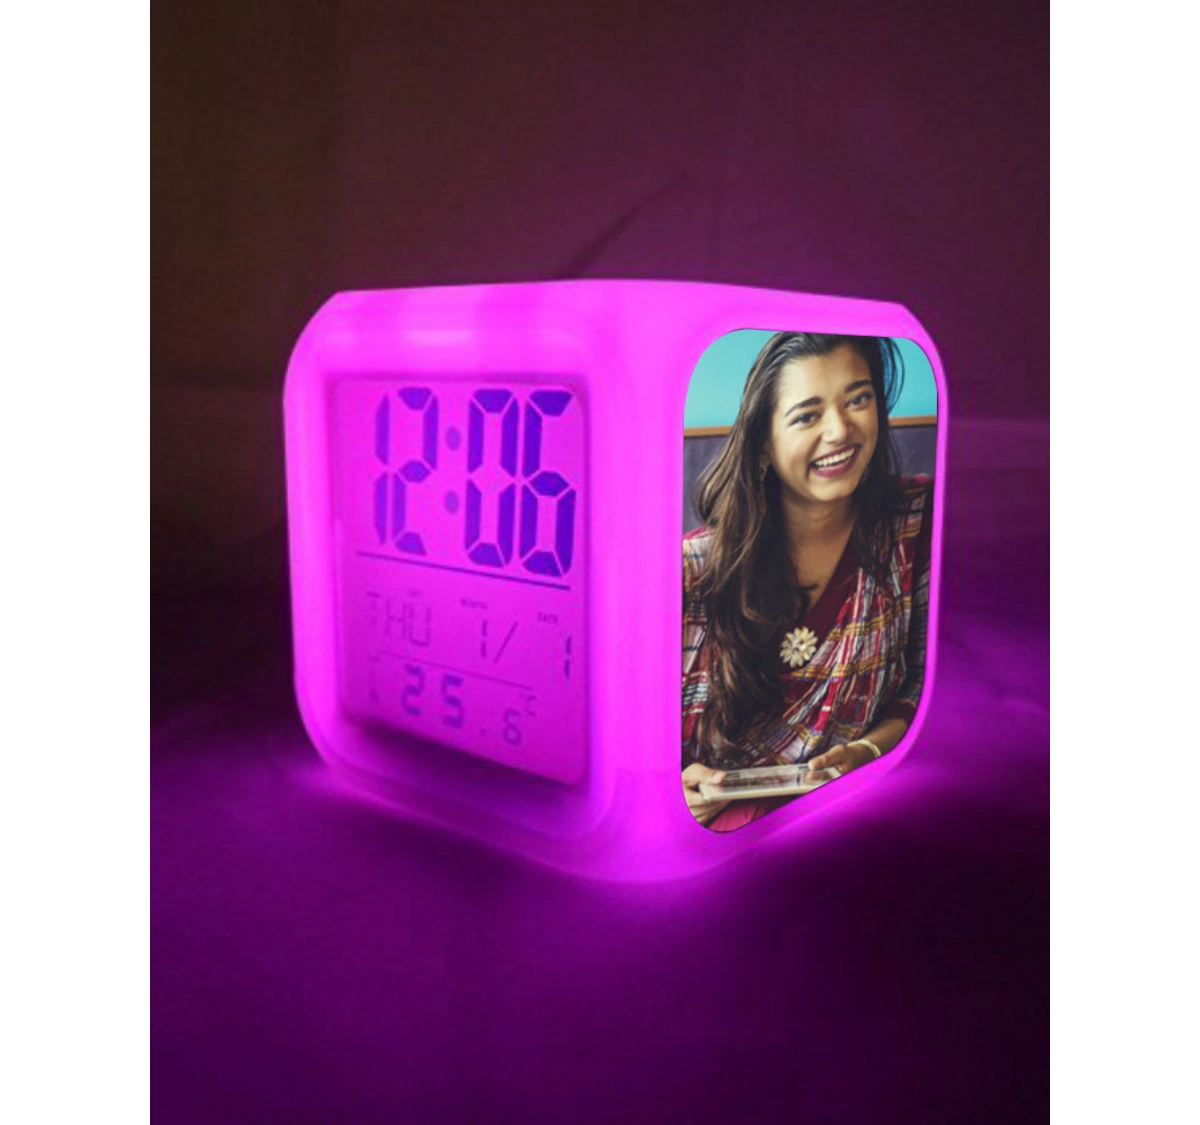 Buy or send Personalised LED Alarm Clock online by Bakers Wagon